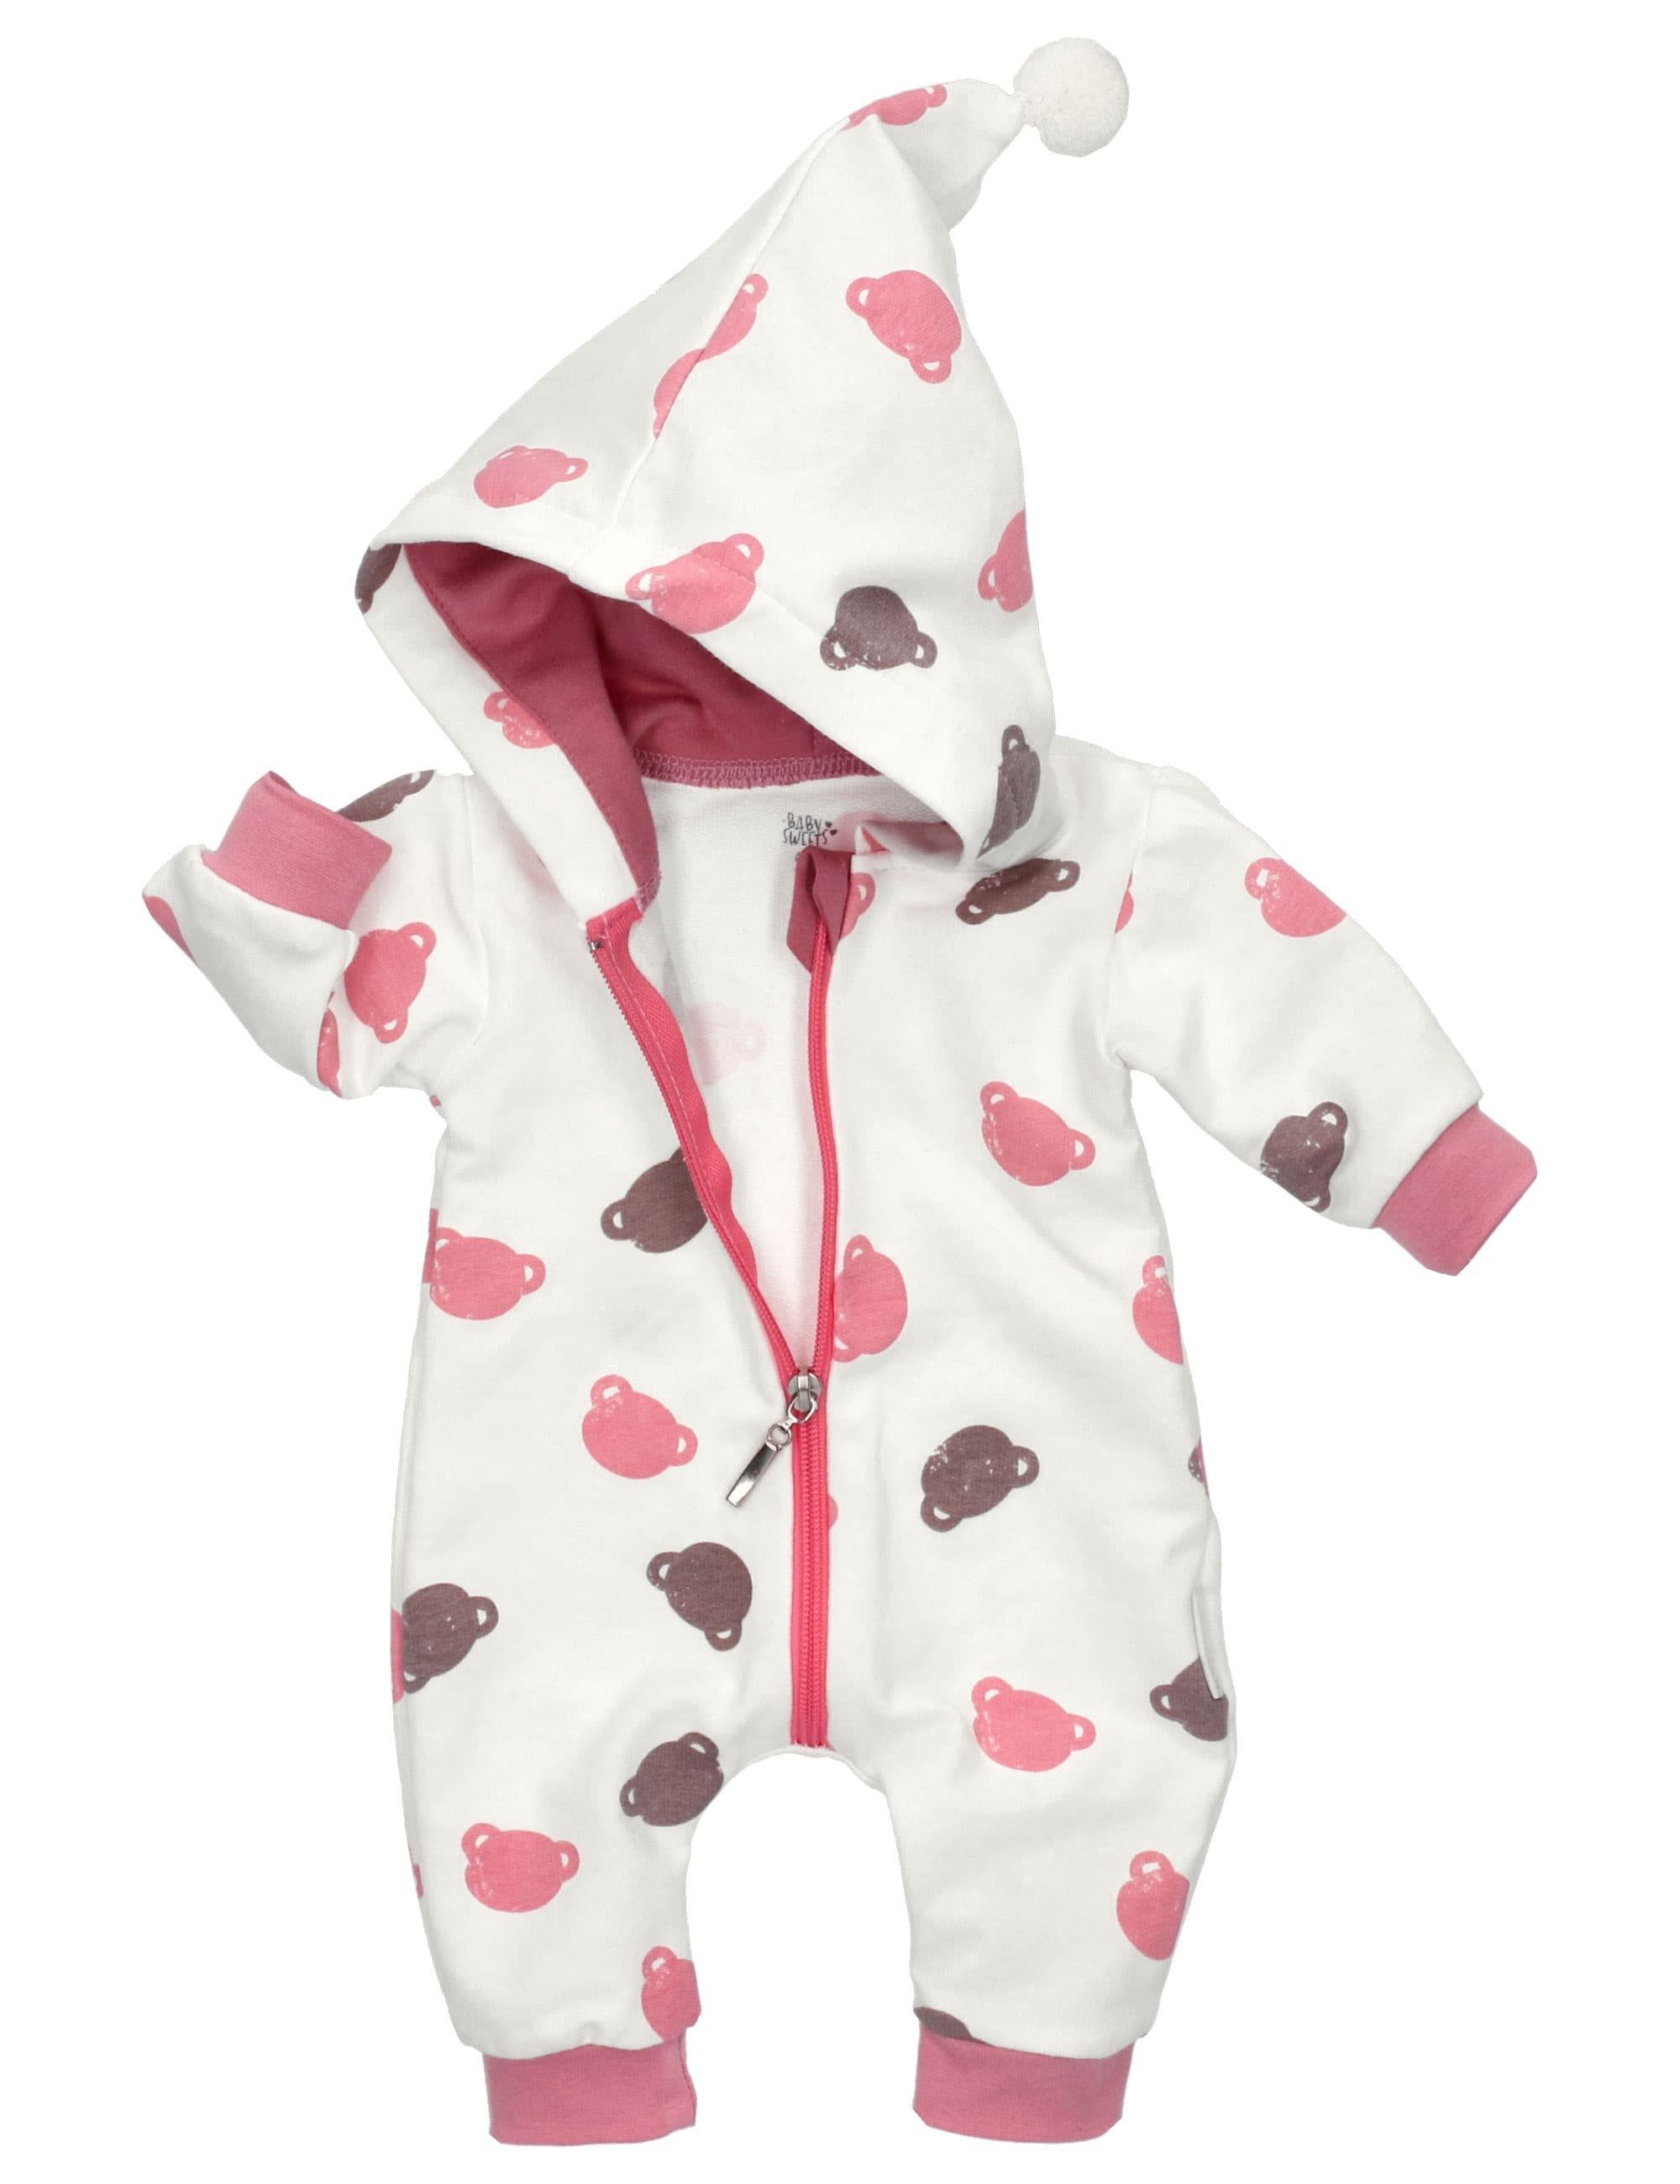 Sweets Baby rosa Koala Overall Overall (1-tlg) Strampler, weiß